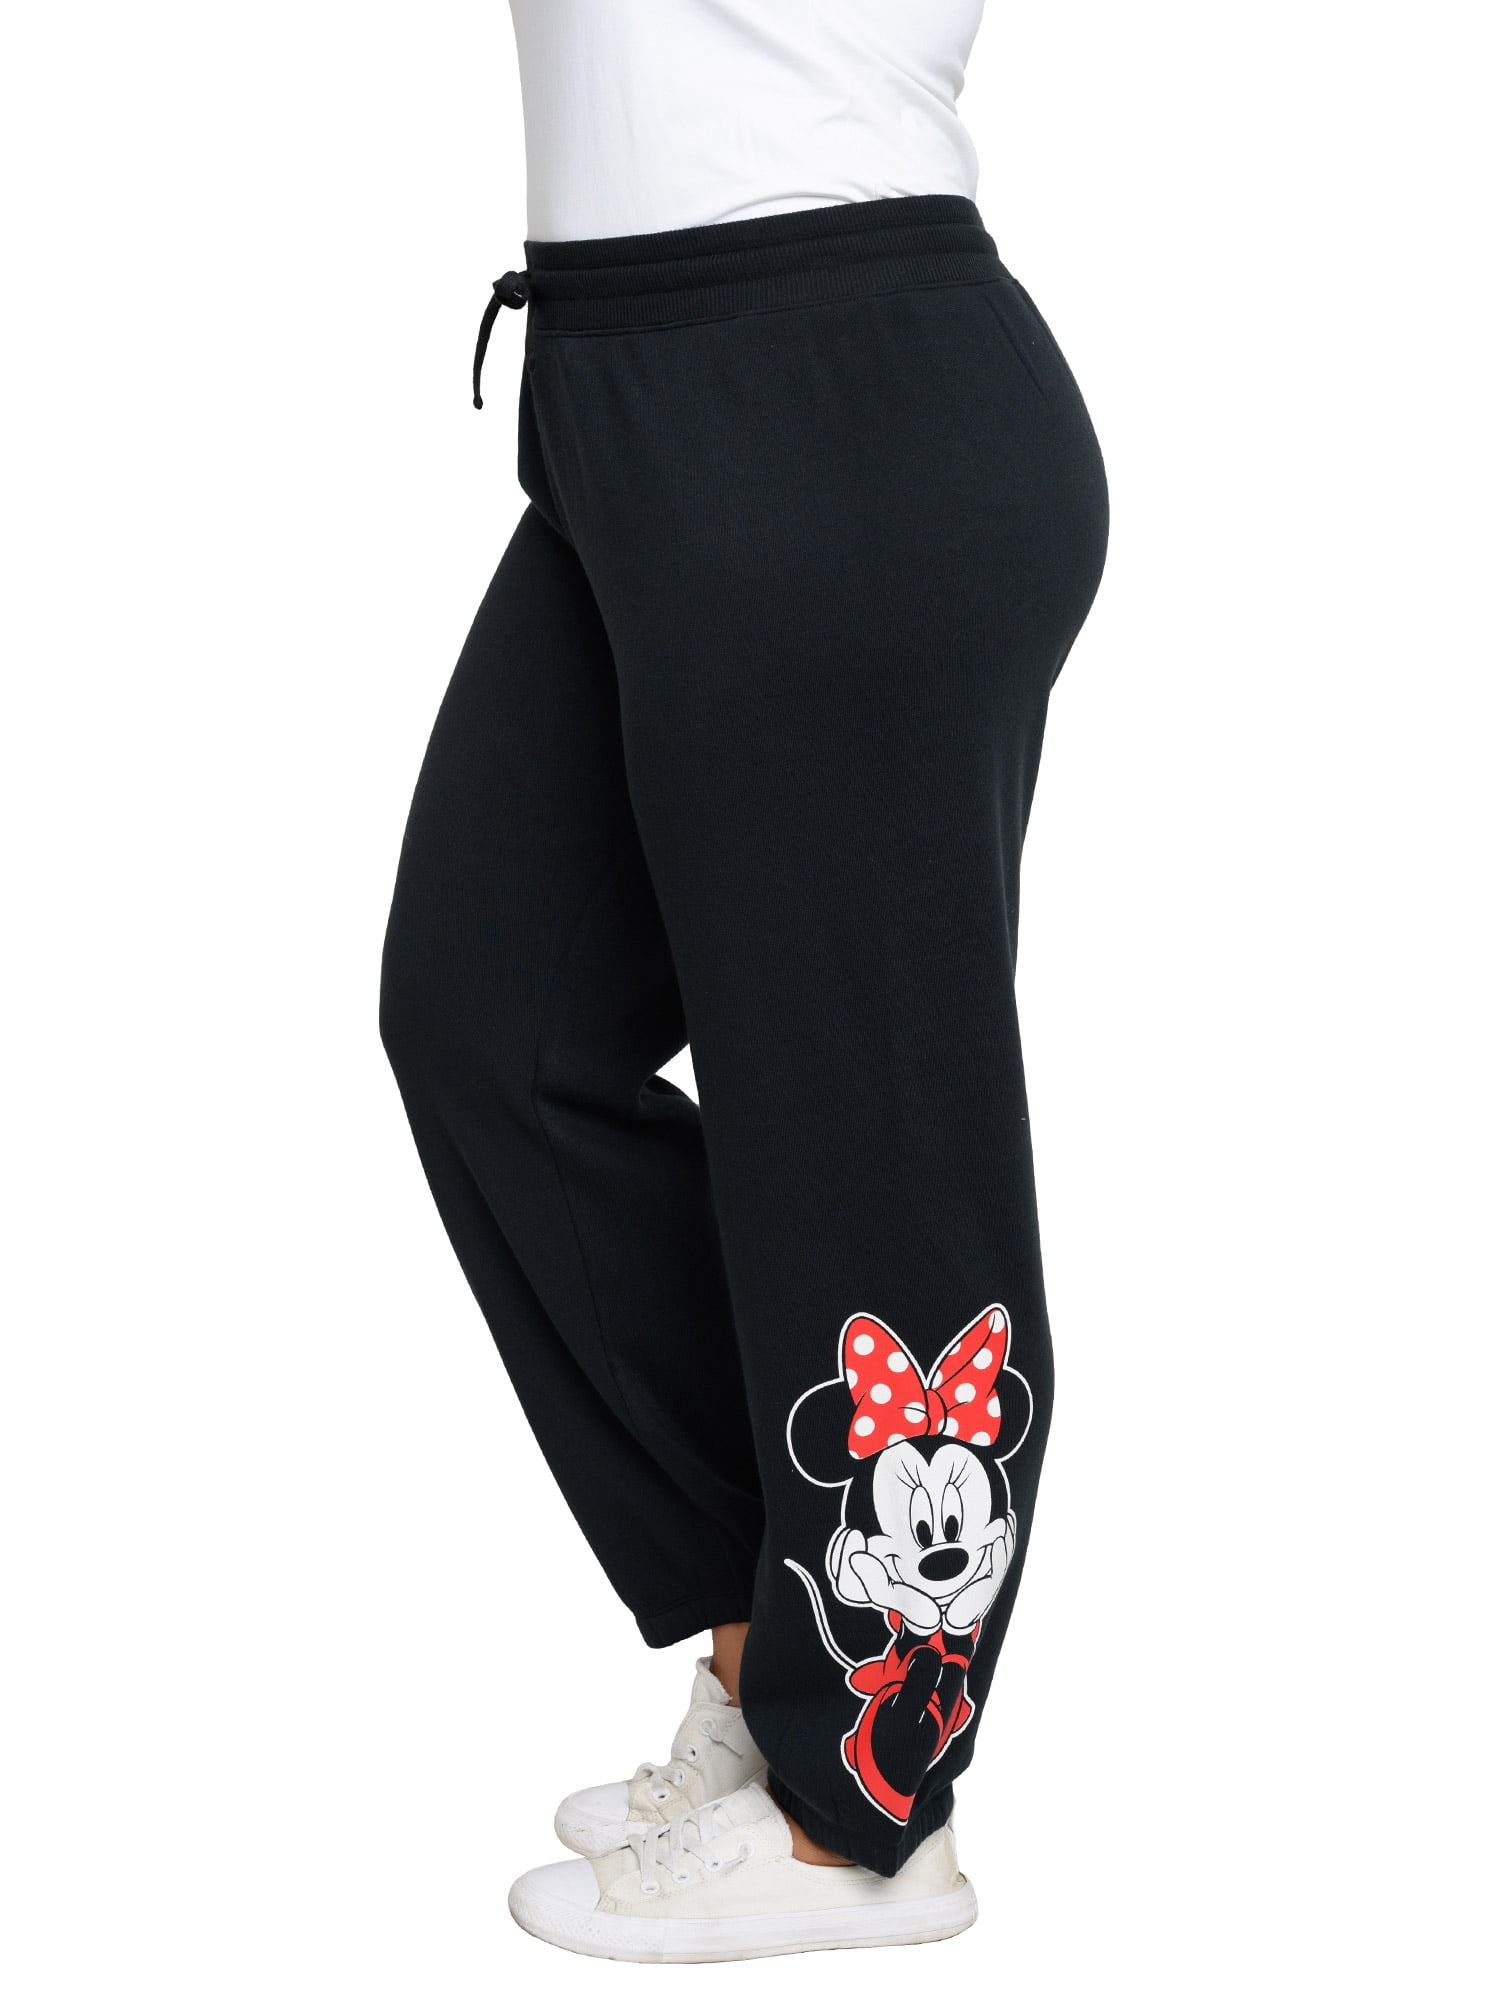 WDW - All-Over-Print Sweatpants - Minnie Mouse (Adult) — USShoppingSOS